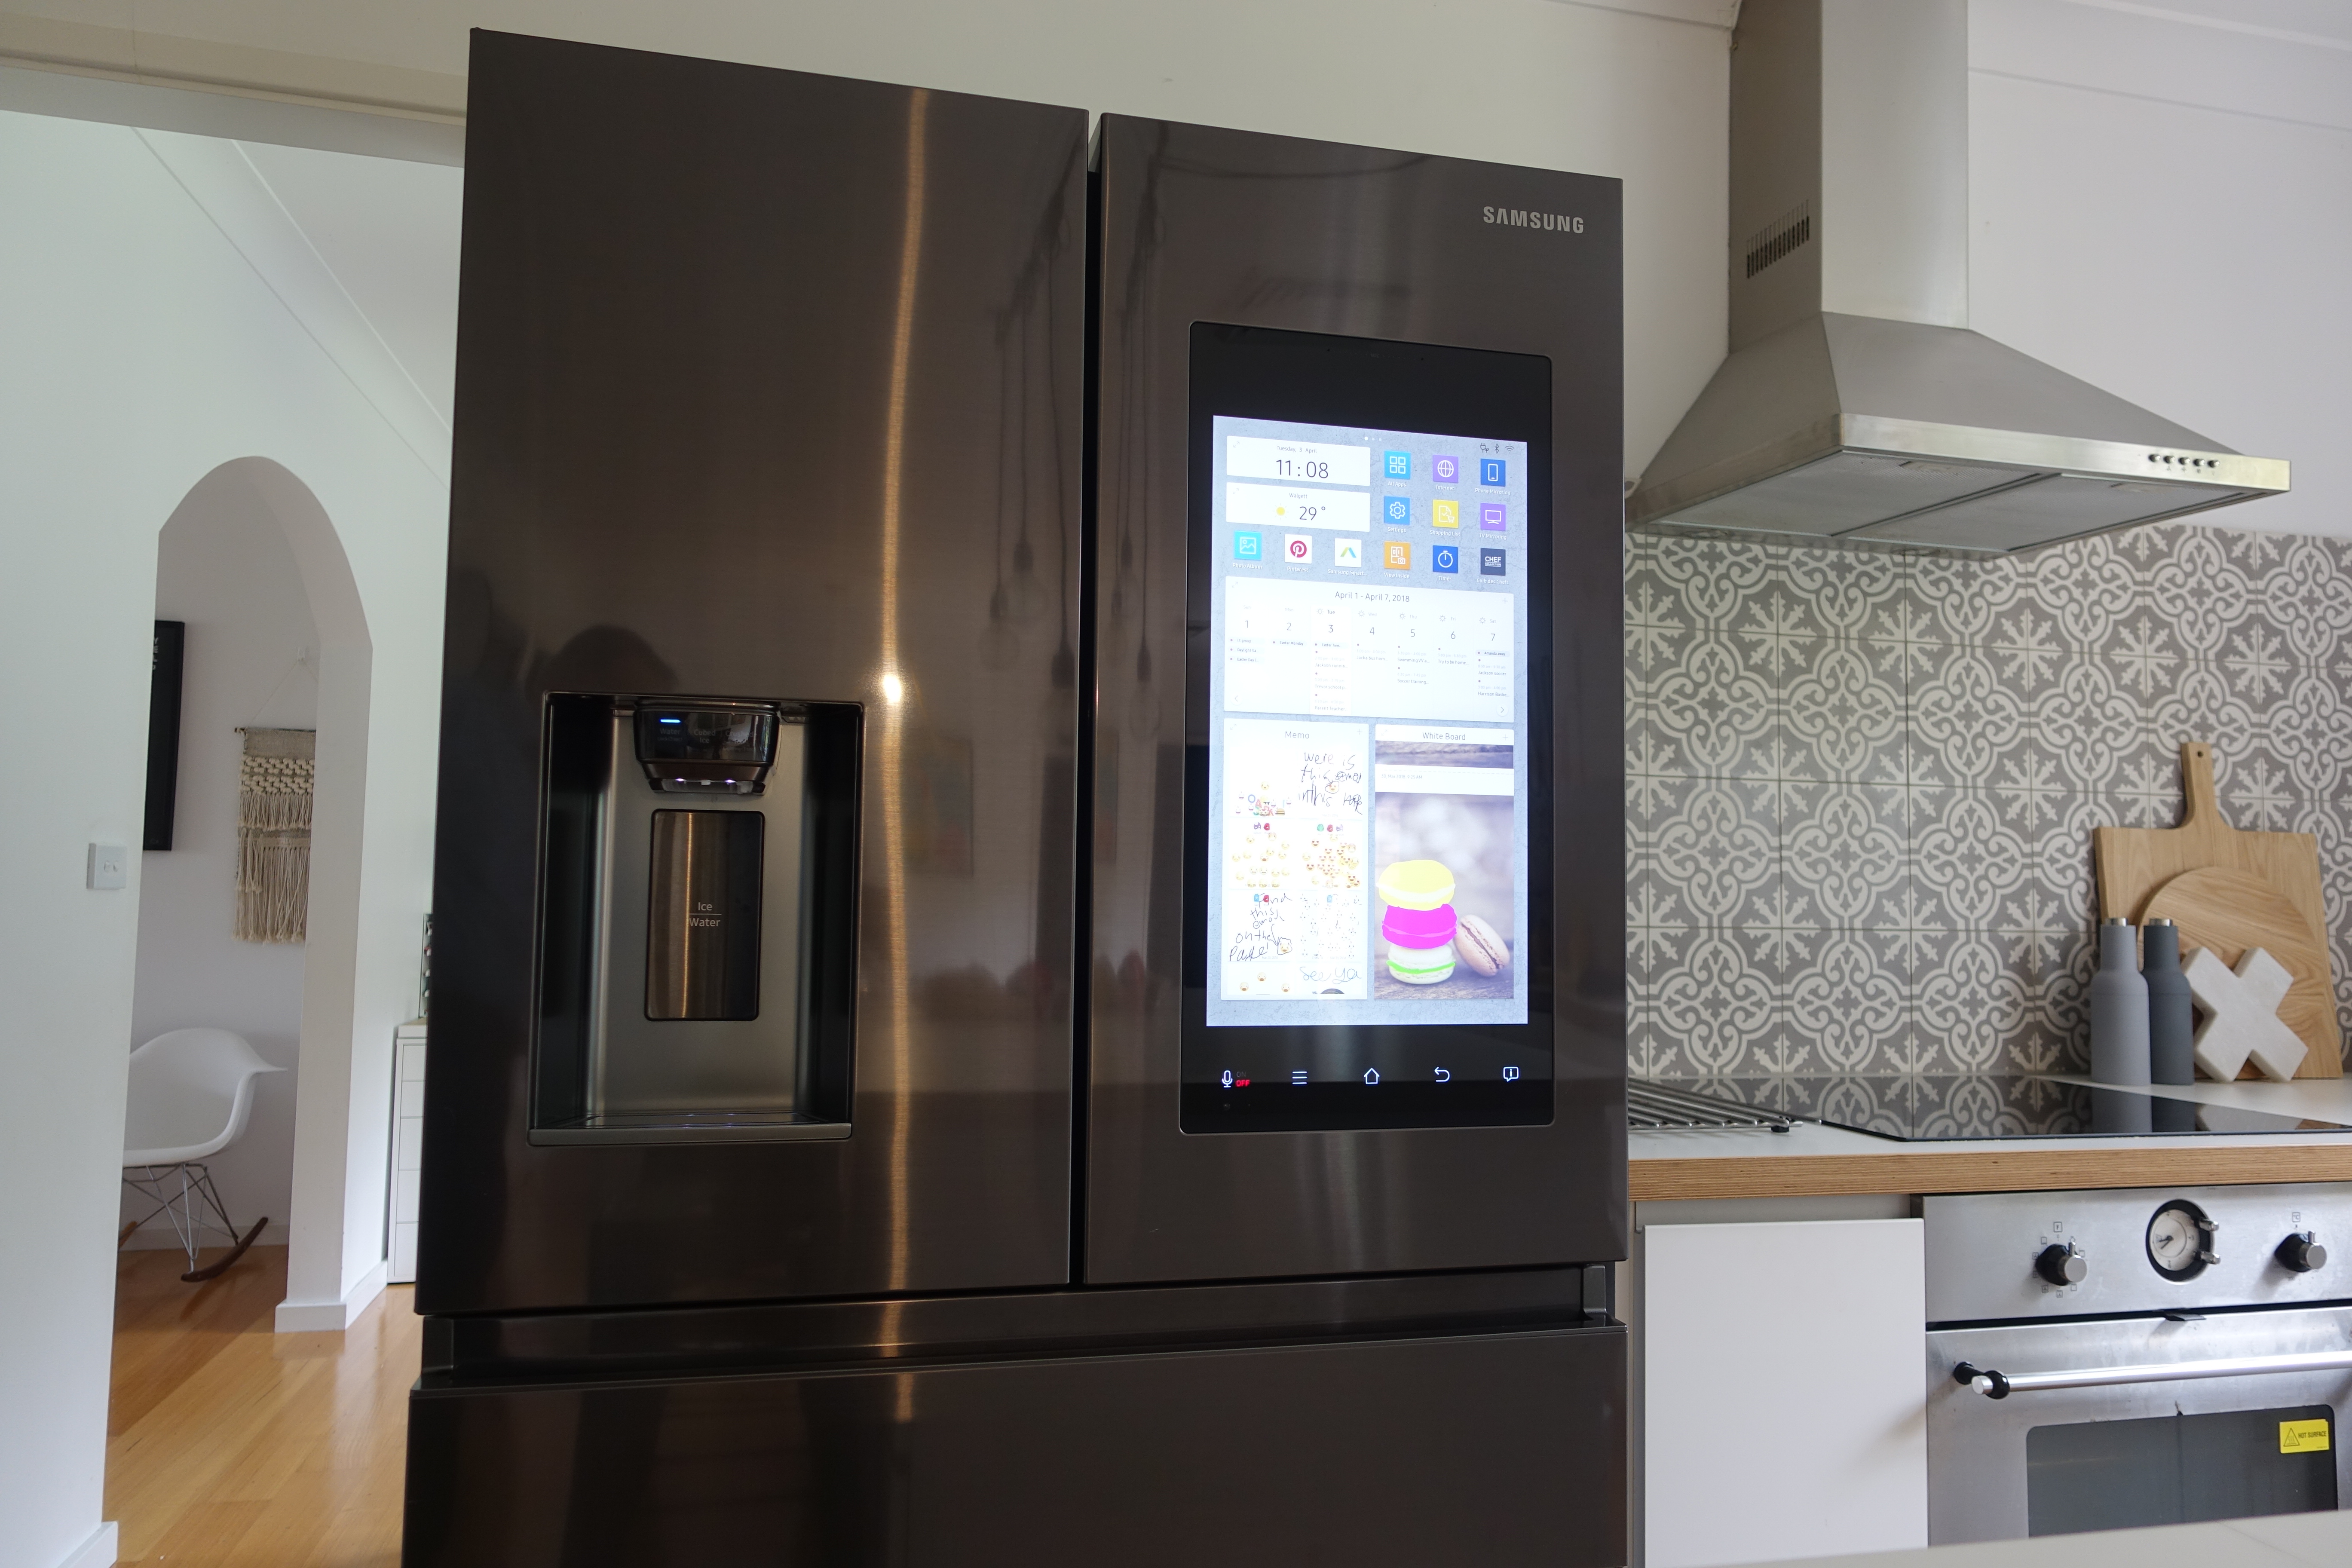 Samsung Family Hub Fridge Review The Smartest Fridge You Can Own